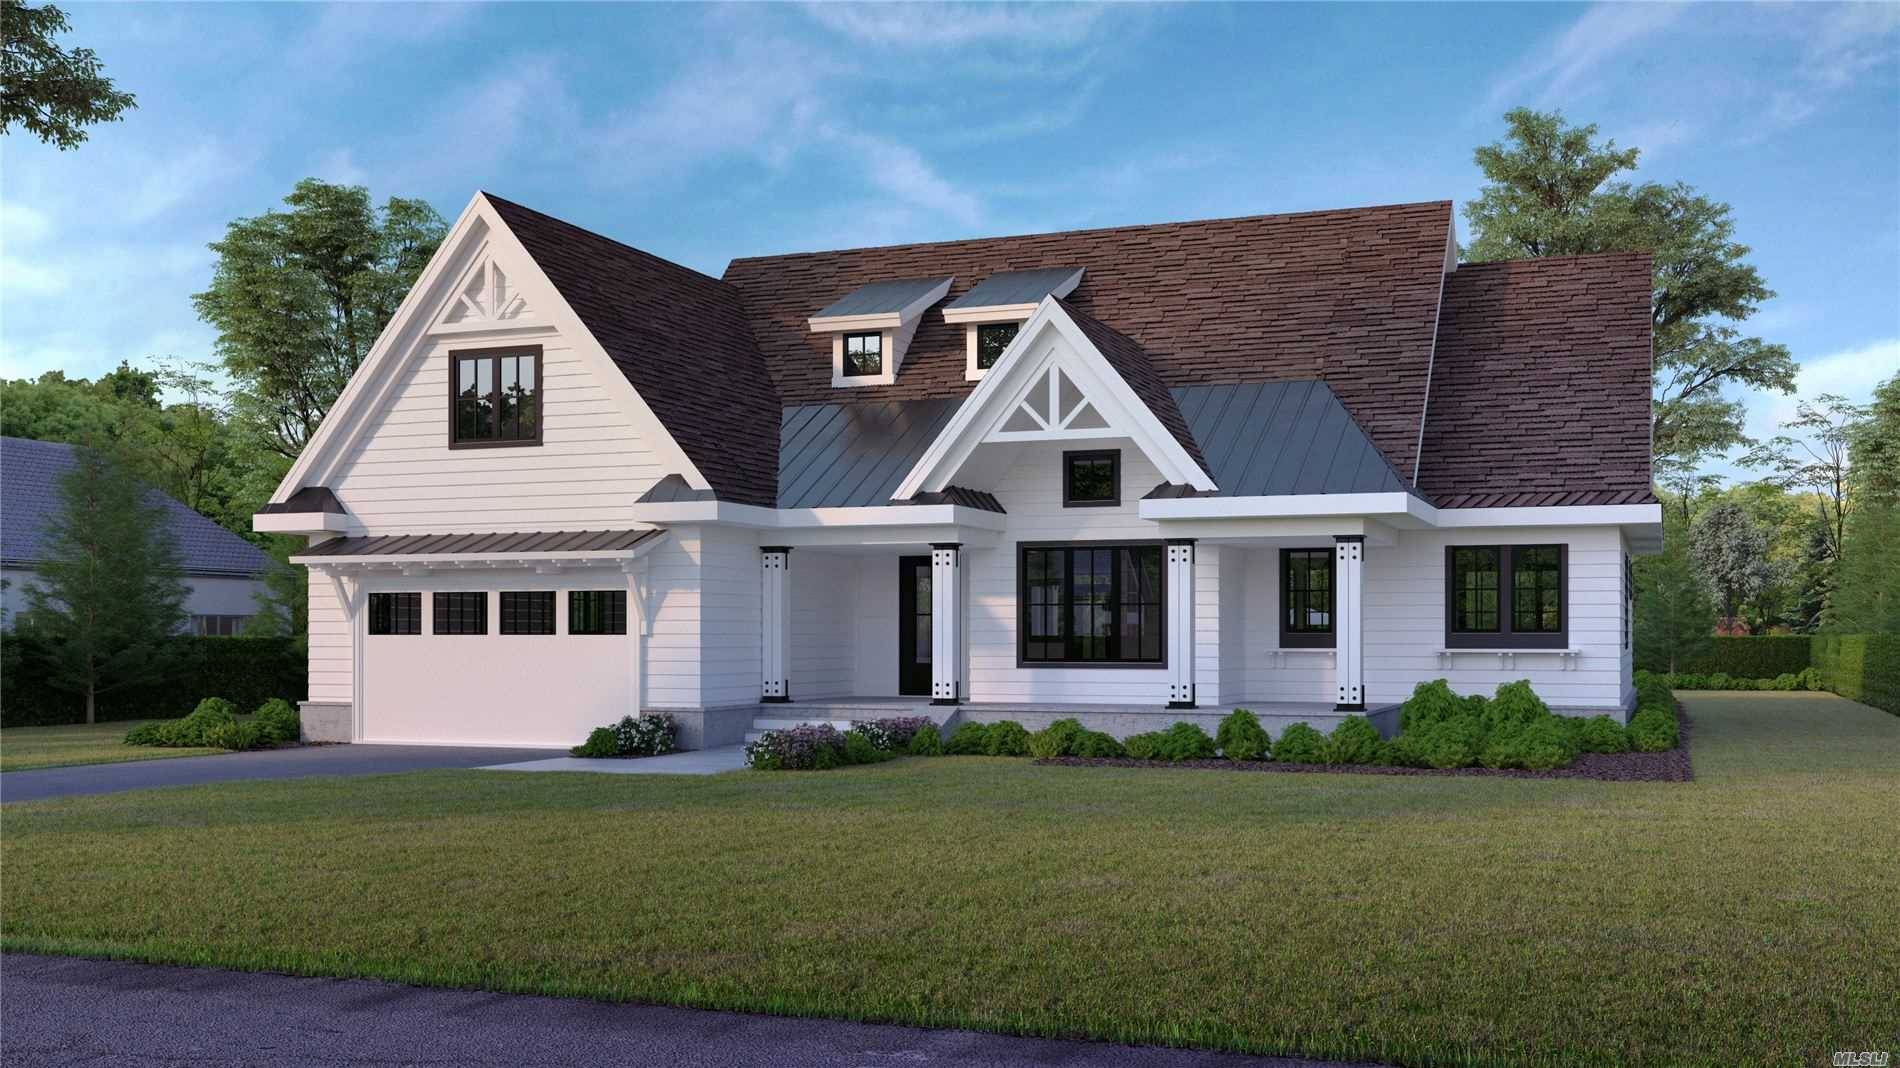 Currently not built, completion expected May 2021 by Roberts Premier Development for this immaculate 4 bedroom, 4.